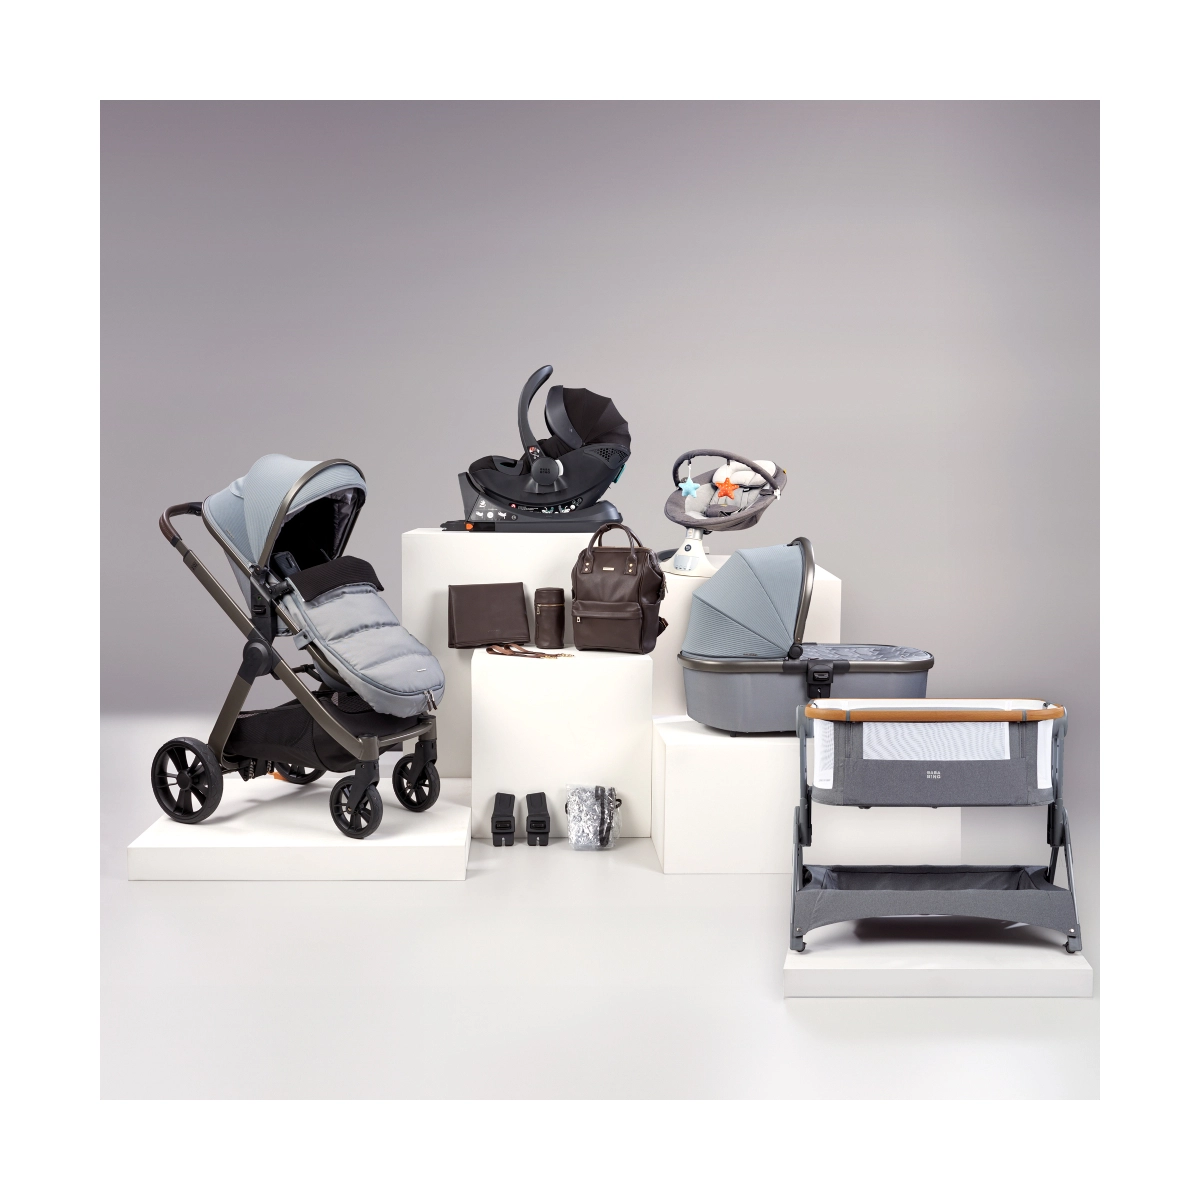 BabaBing Raffi 15 Piece Travel System and Home Bundle